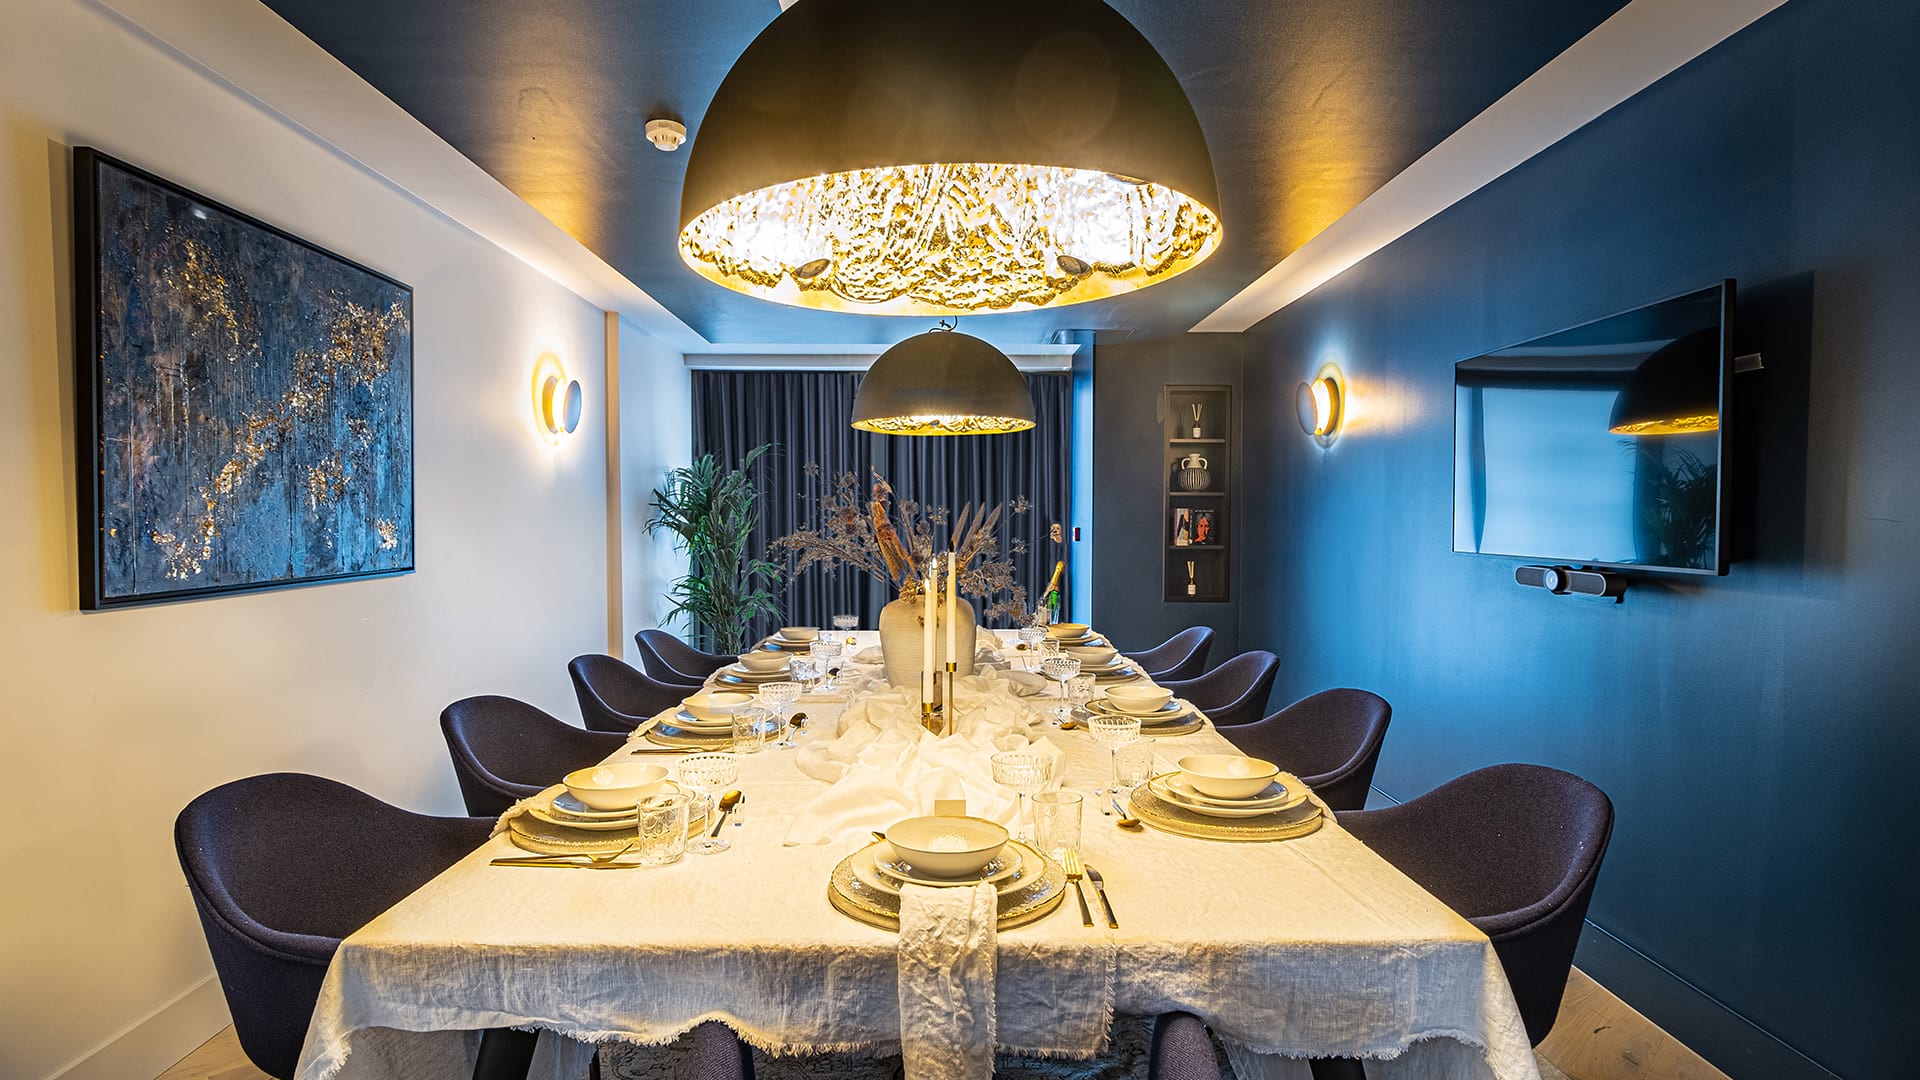 Apartments to Rent by Cortland in Cortland Cassiobury, Watford, WD18, private dining